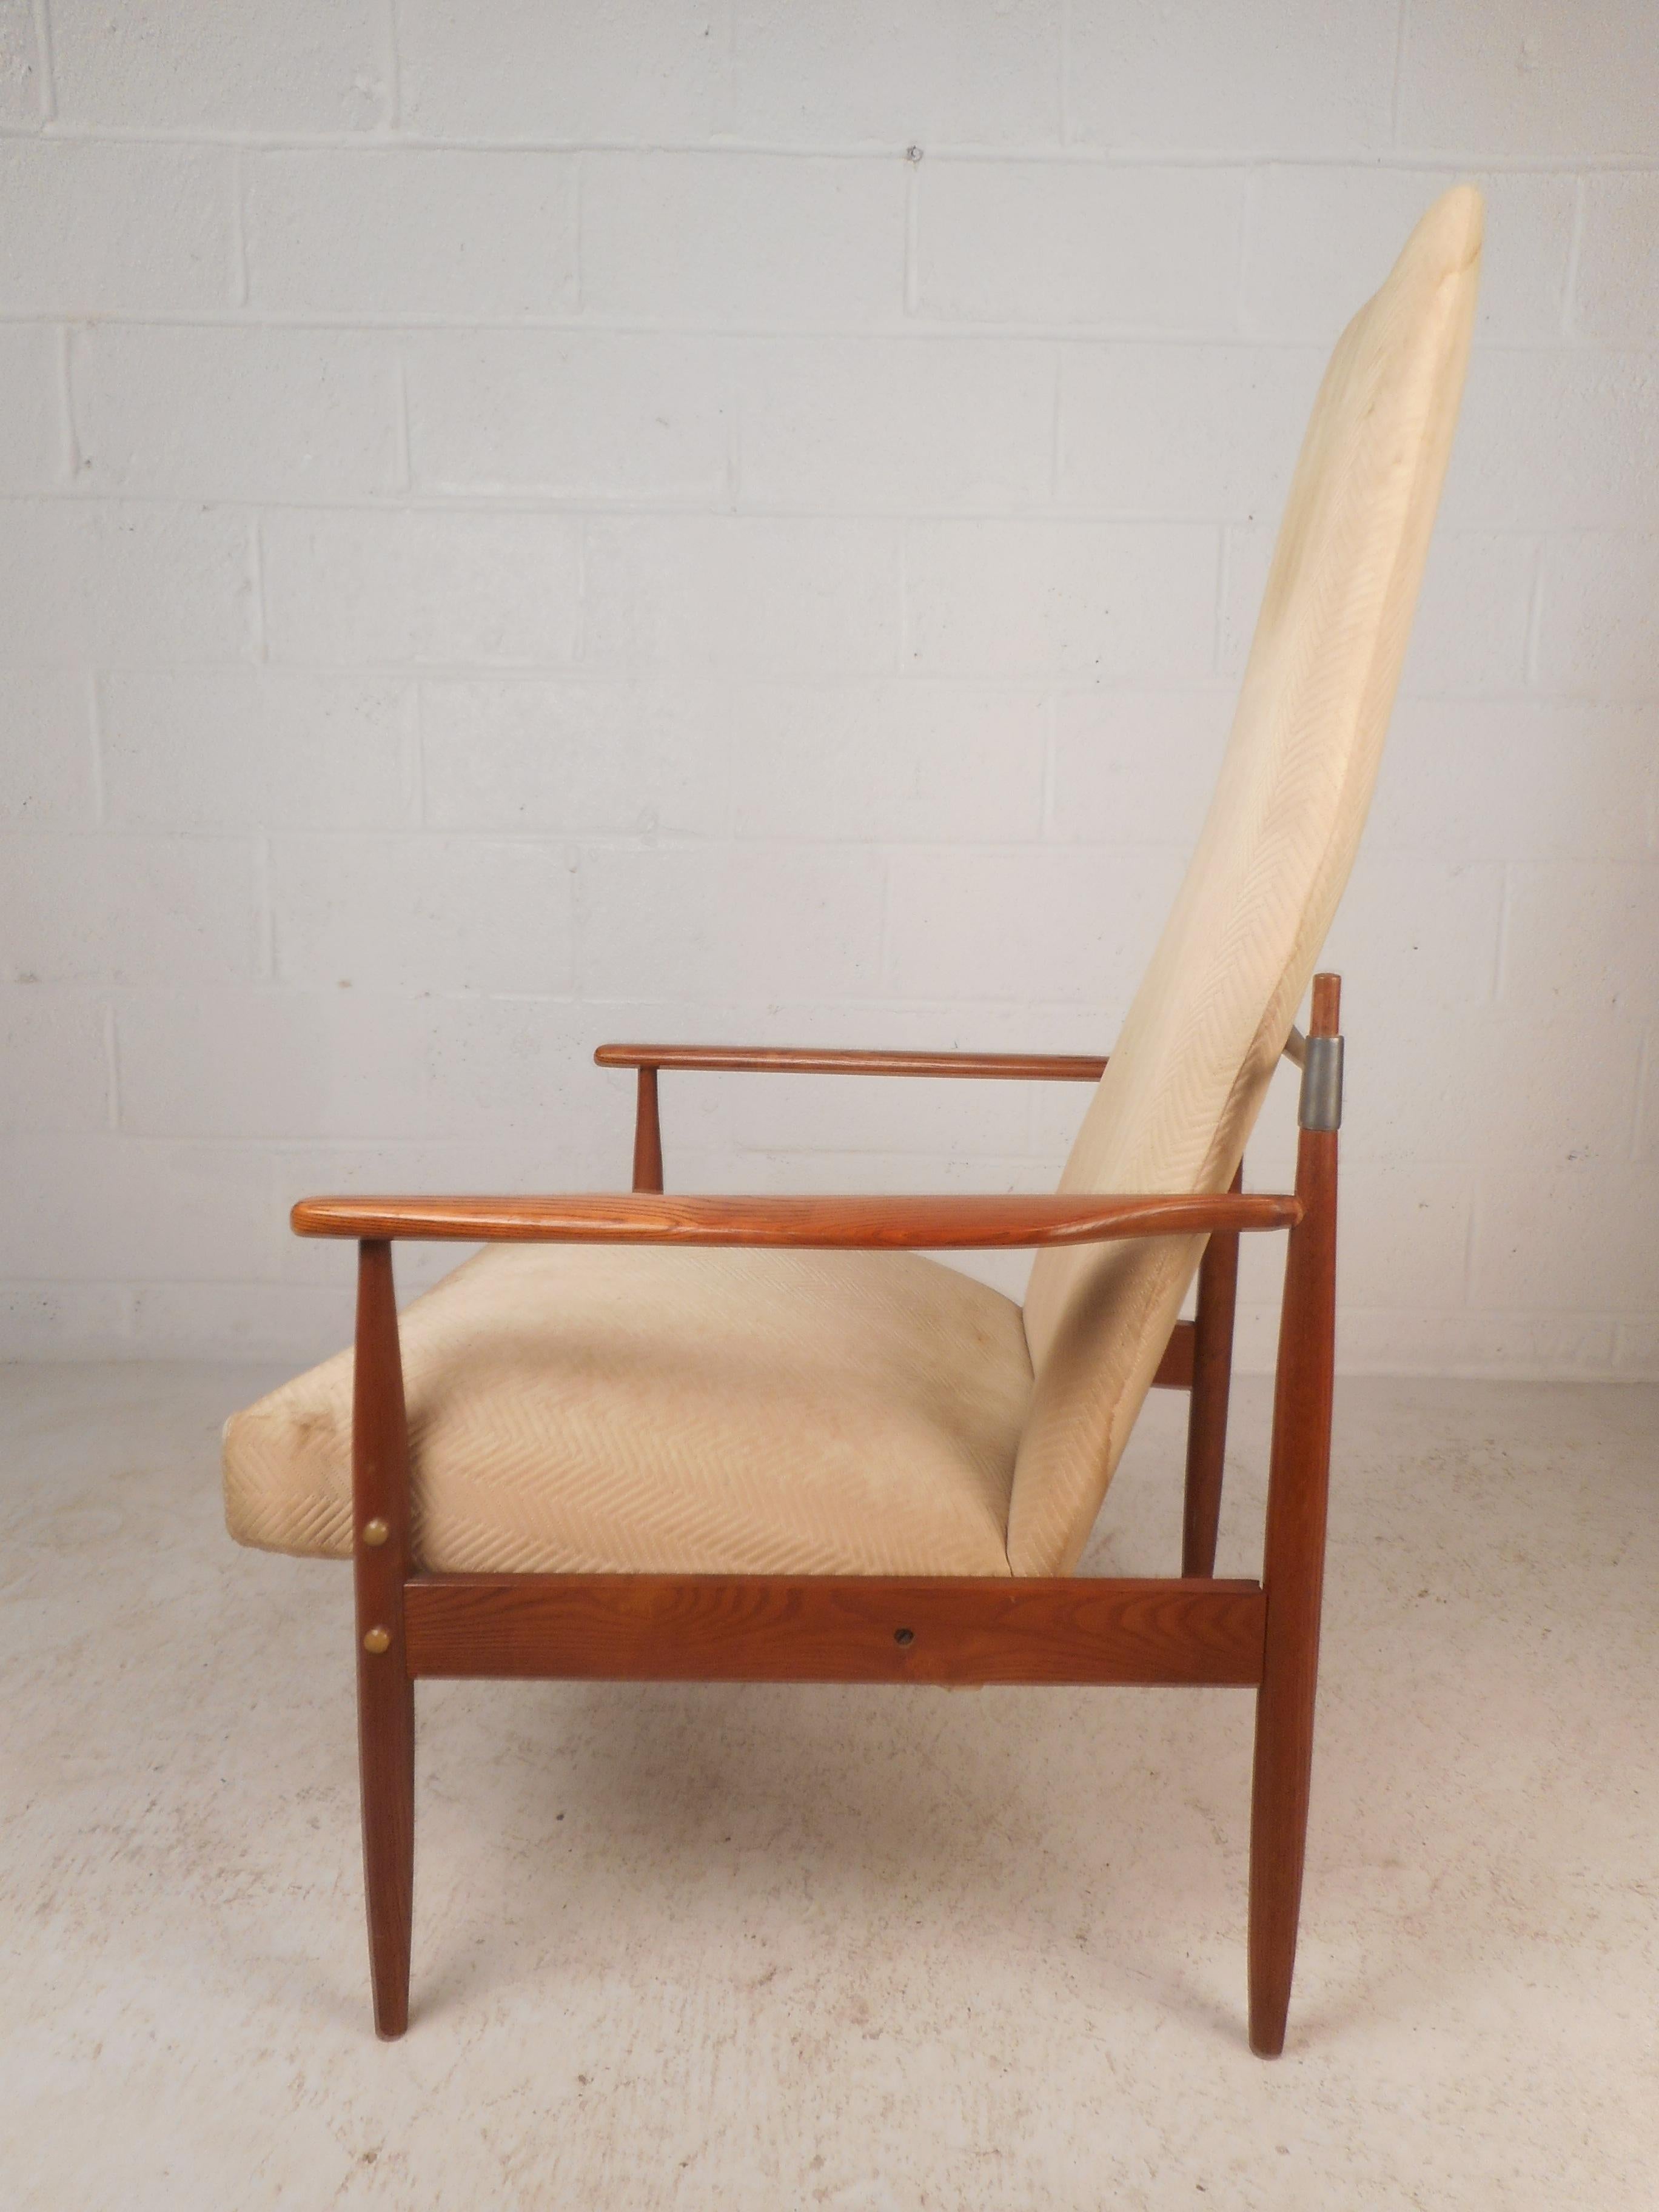 This beautiful Mid-Century Modern lounge chair features a high backrest and a thick padded seat. Sleek Danish design with a sculpted oak frame and tapered legs. This rare Jens Quistgaard style lounge chair by Peter Hvidt makes the perfect addition